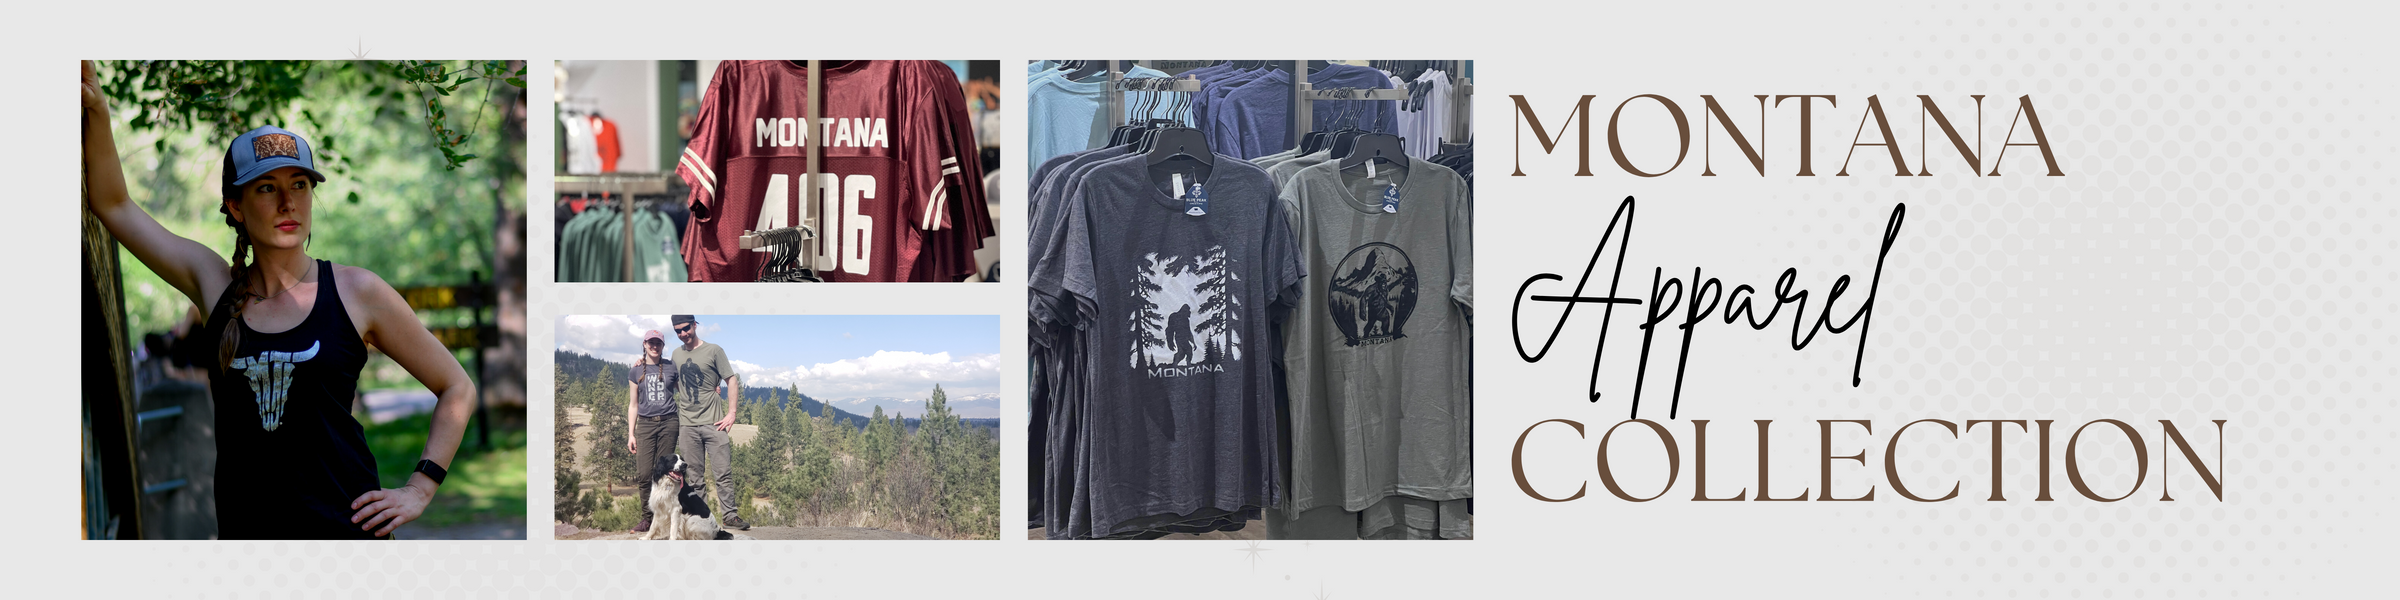 Montana Apparel Collection banner, featuring a collection of montana apparel, 406 and bigfoot apparel